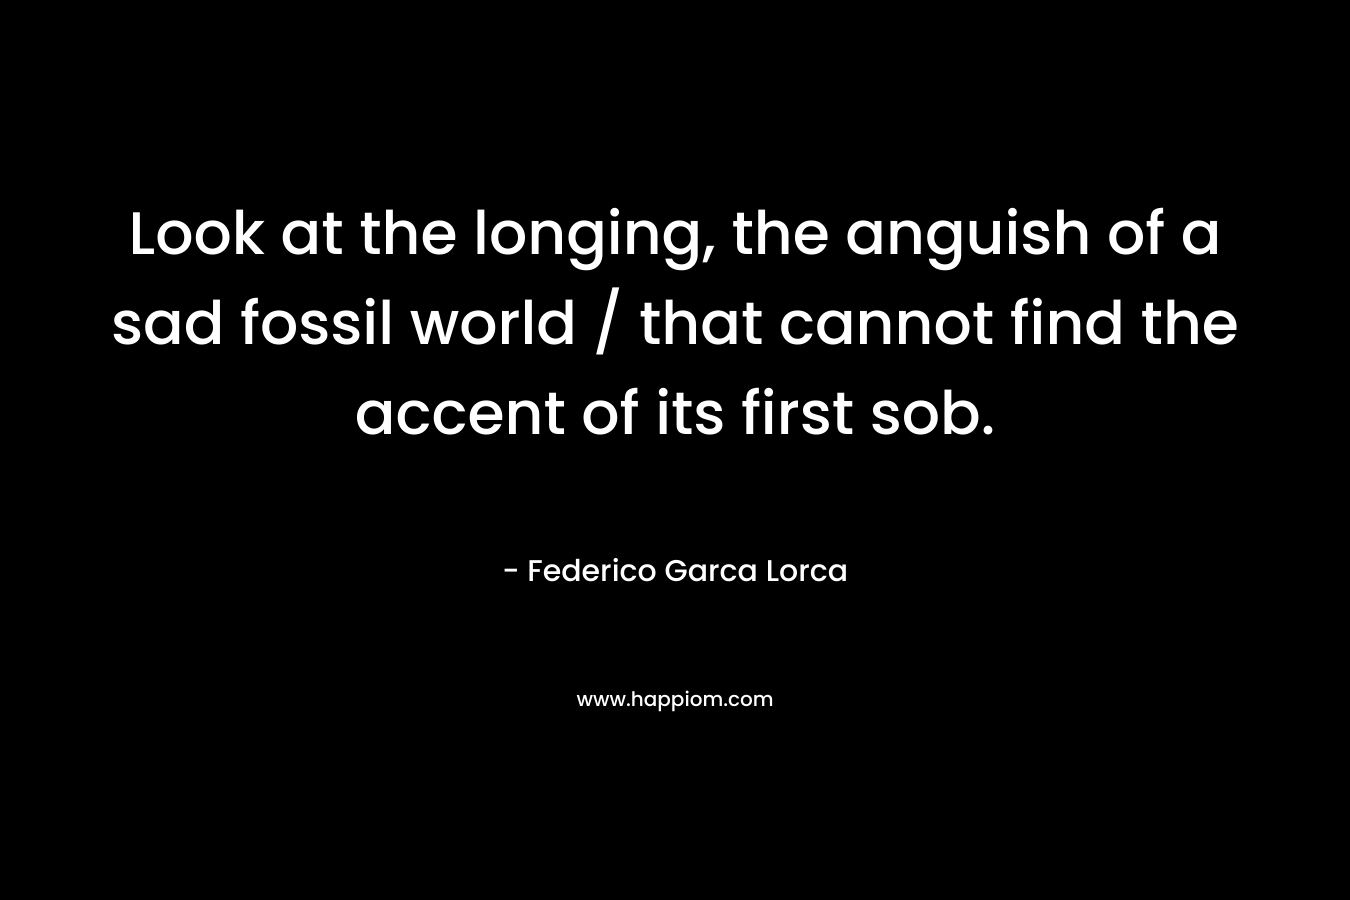 Look at the longing, the anguish of a sad fossil world / that cannot find the accent of its first sob. – Federico Garca Lorca